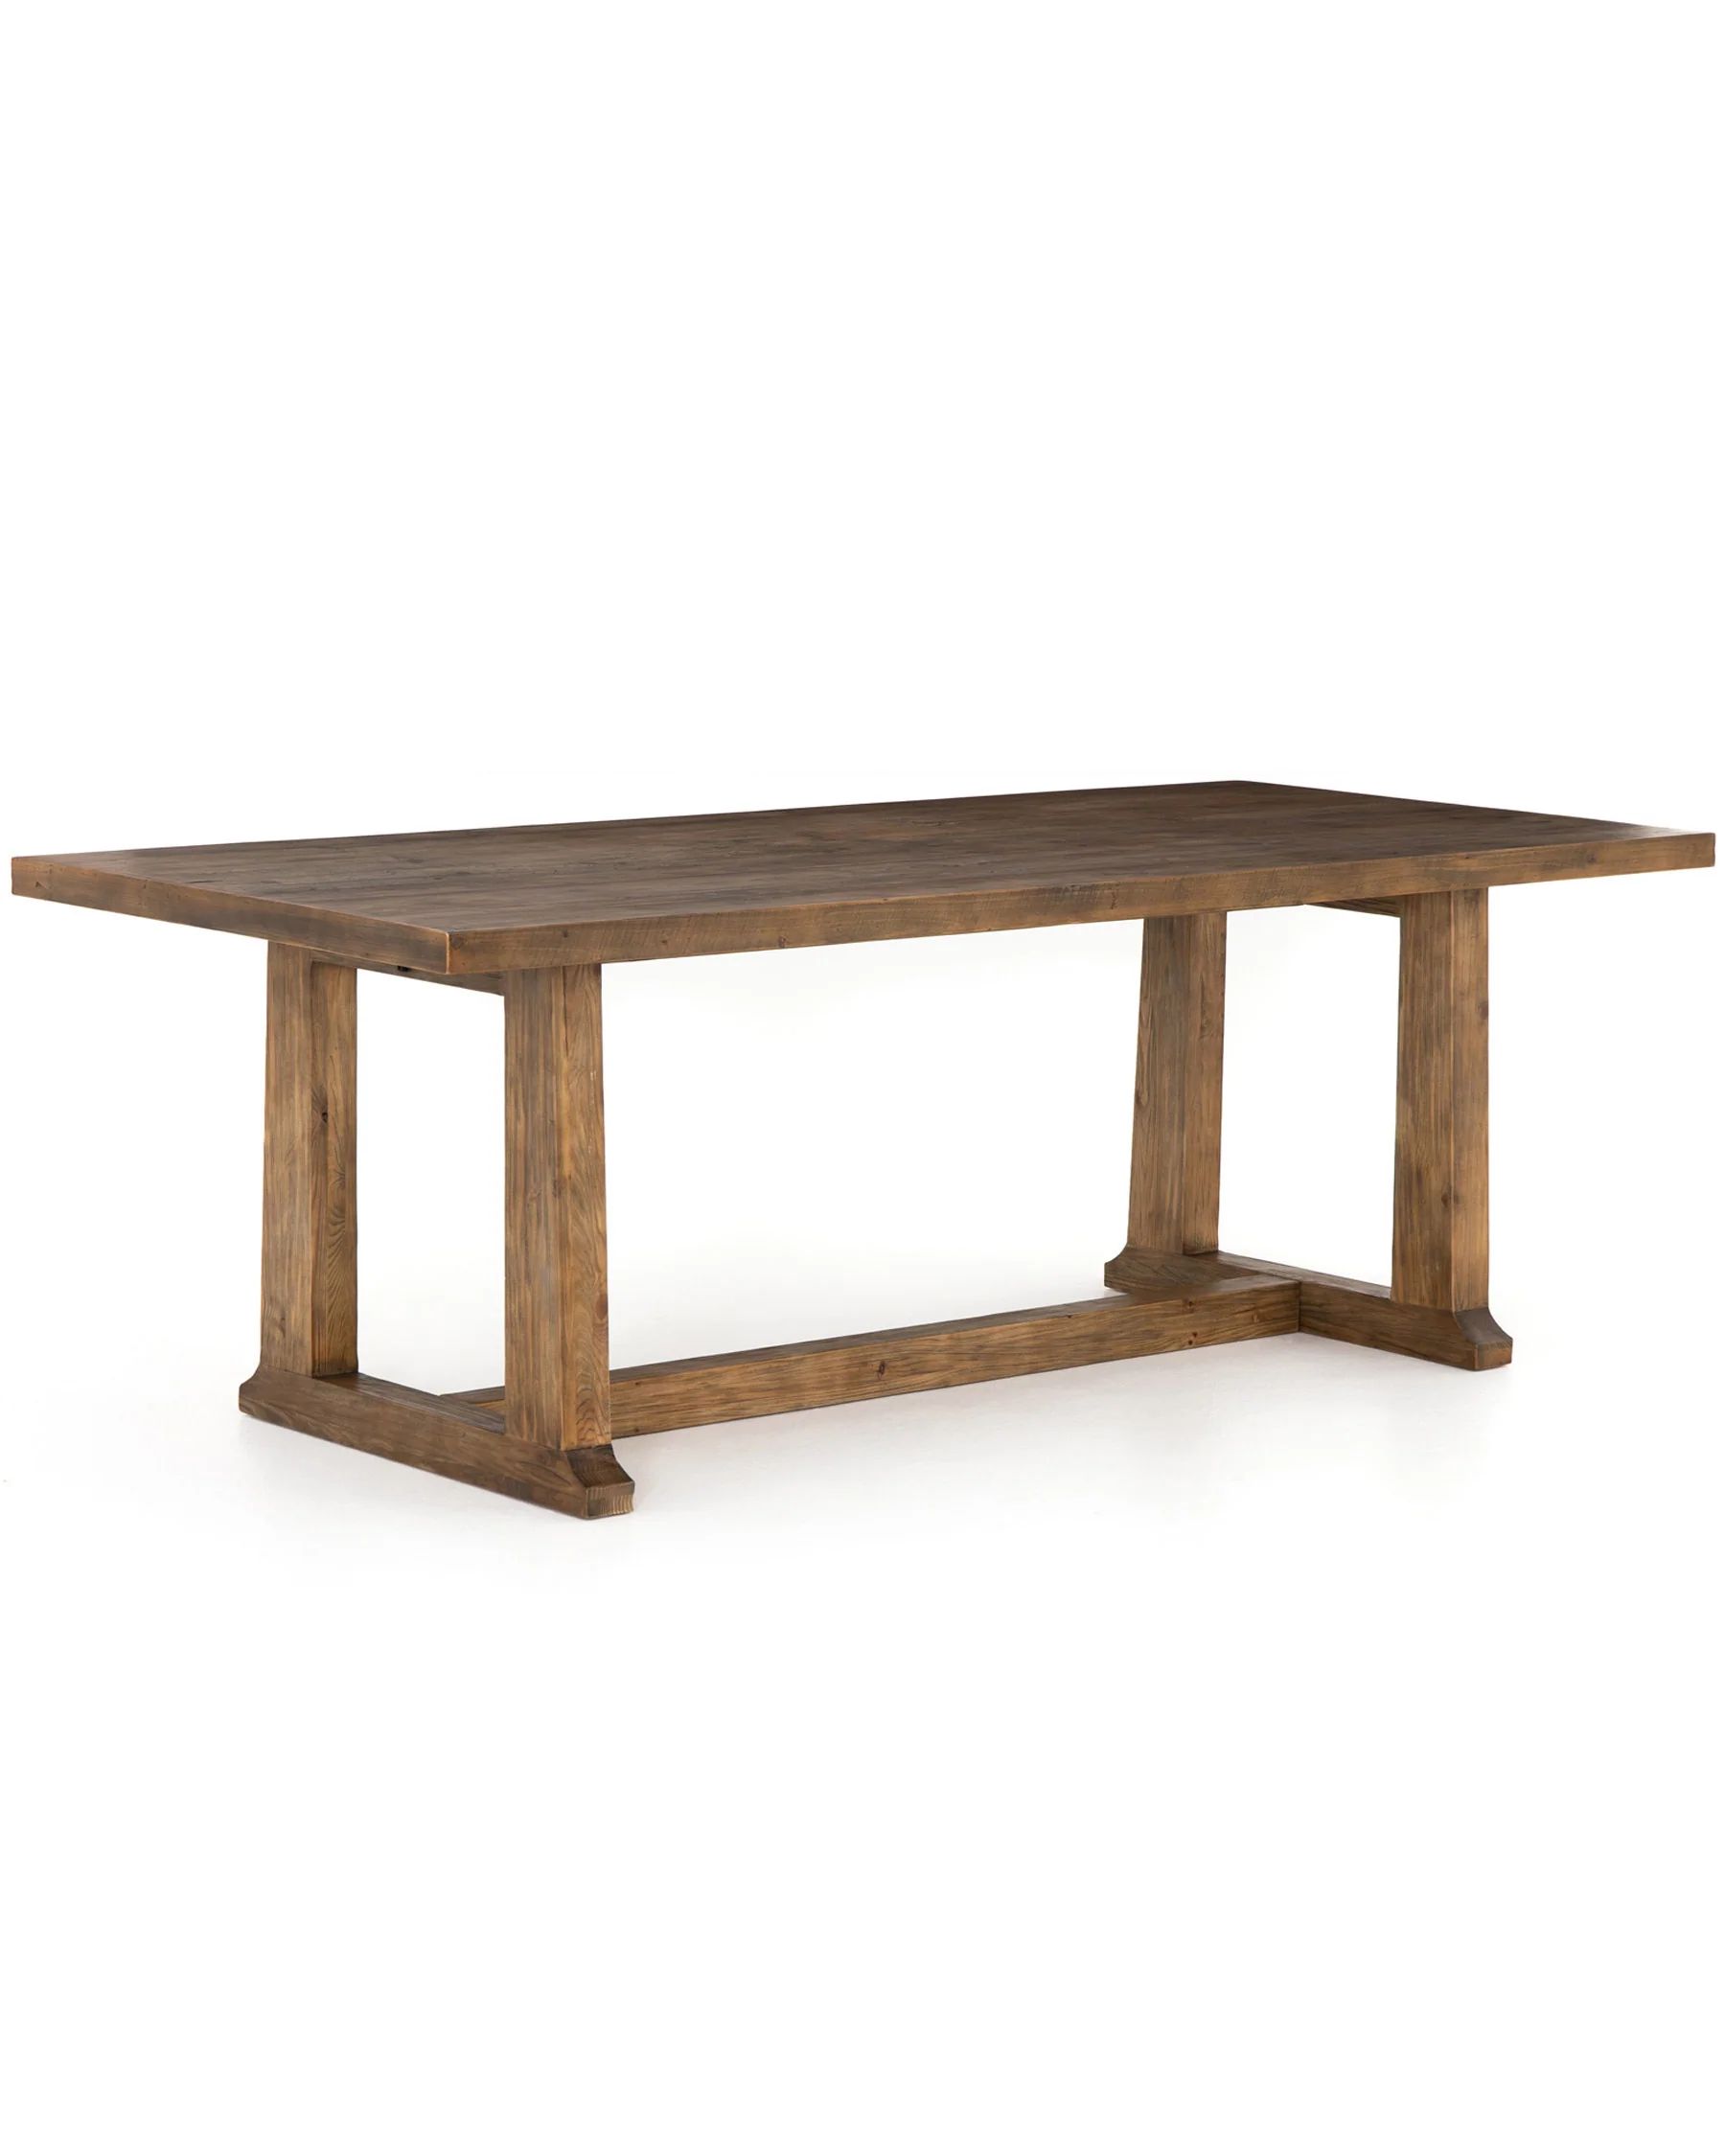 Union Dining Table | The Vintage Rug Shop